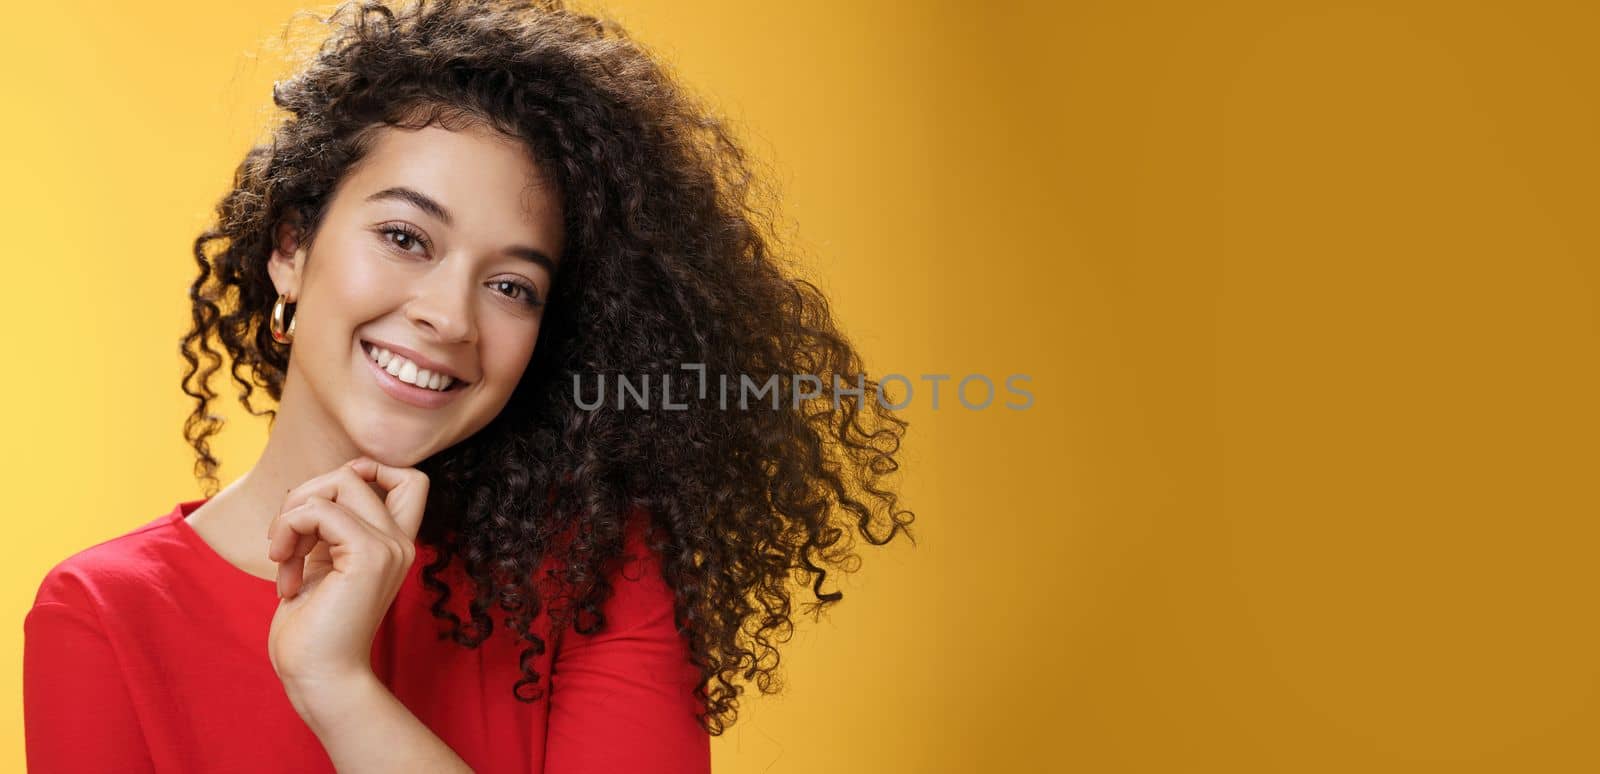 Lifestyle. Close-up shot of stylish and happy bright curly-haired female in red dress tilting head sensually touching chin with finger and smiling broadly making flirty gazed at camera over yellow background.